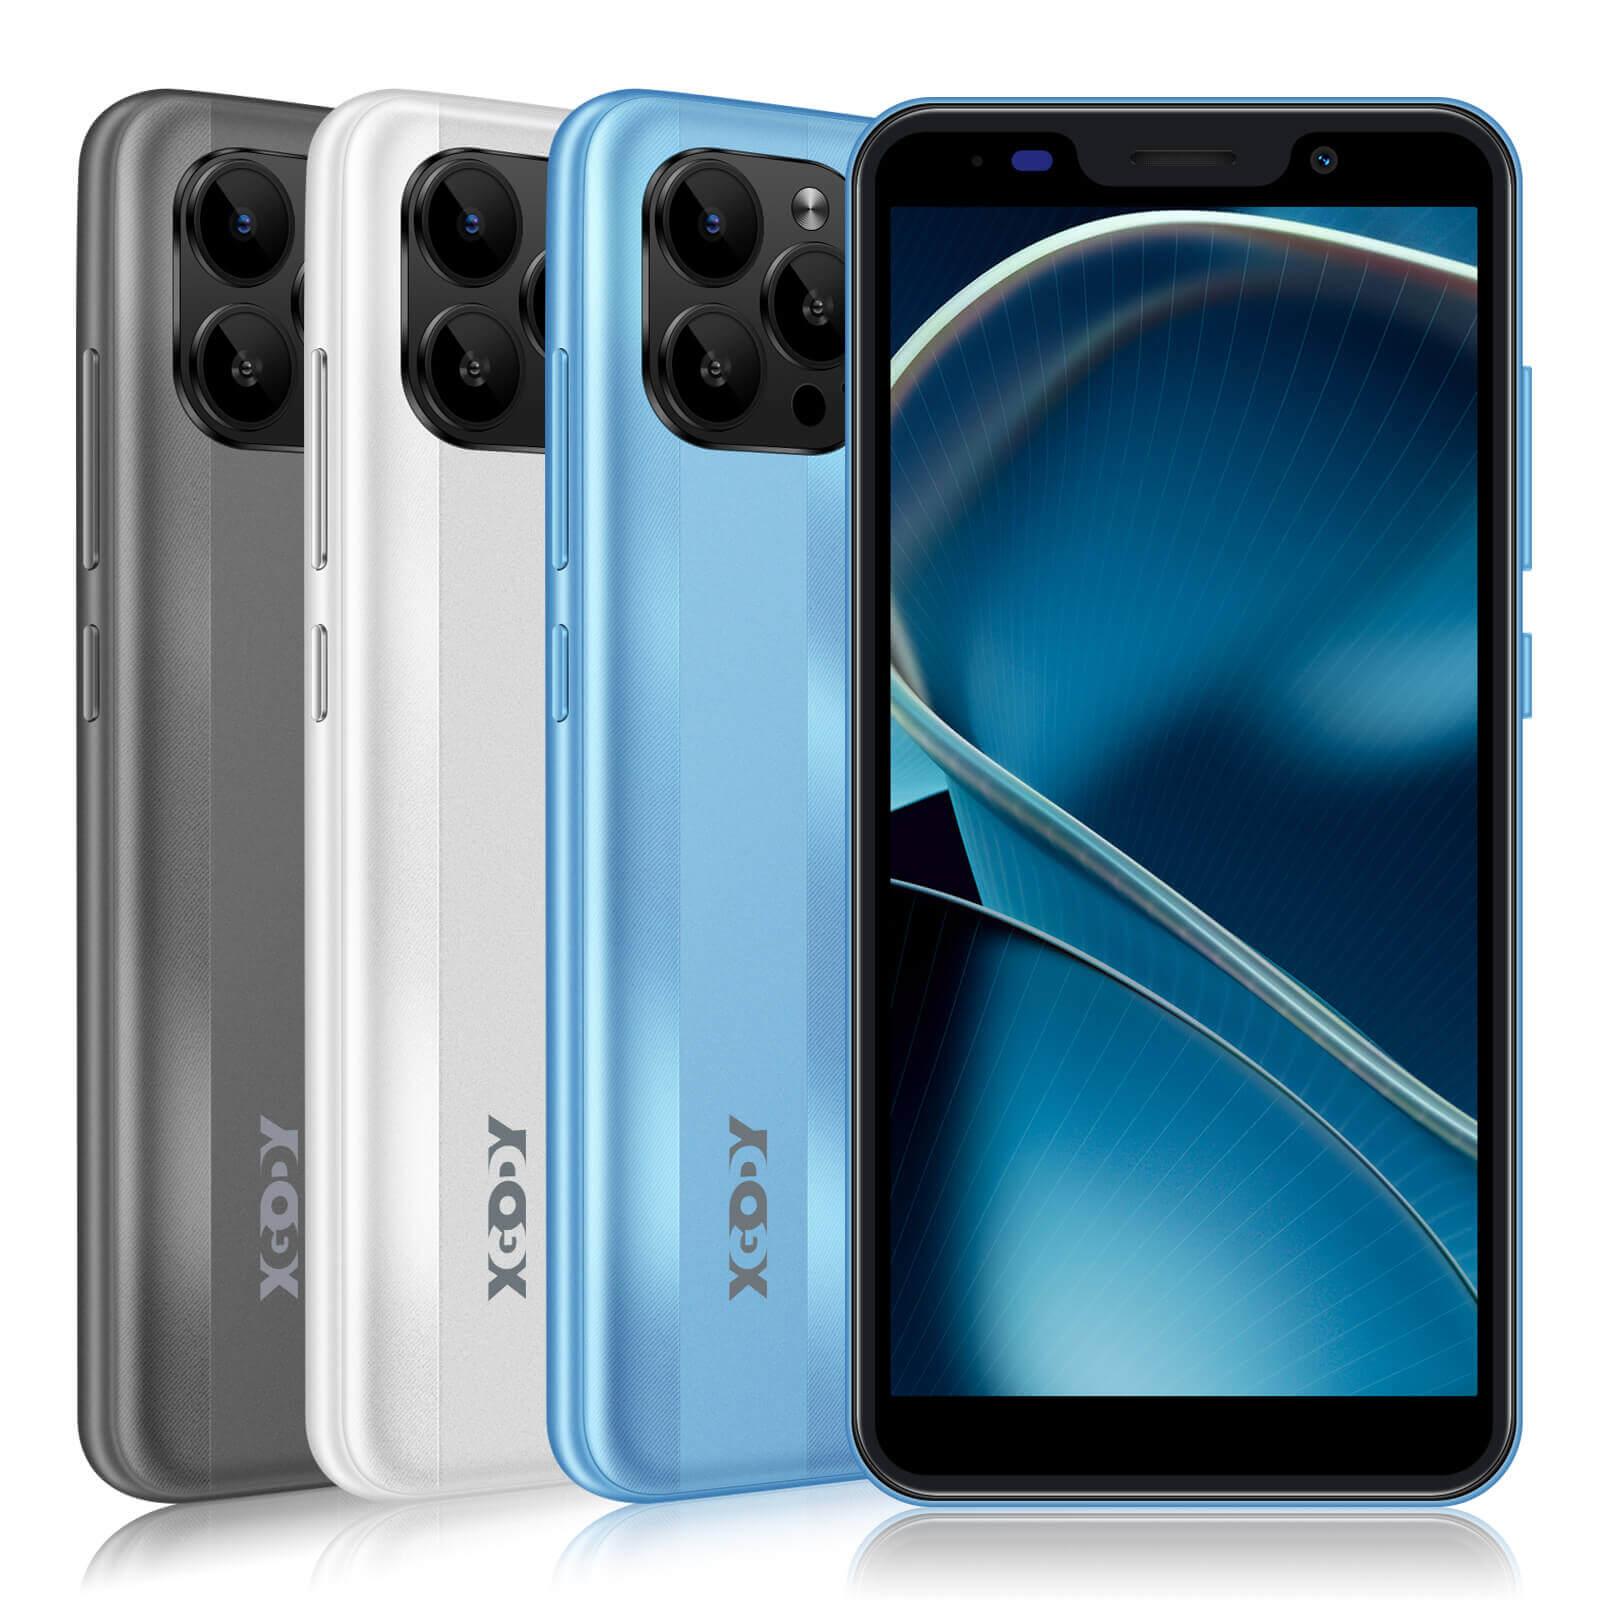 Cost-effective and Most worthwhile XGODY S21 | 5.5" HD Screen, Android 9.0, Small & Sleek Design, Face Unlock - XGODY 